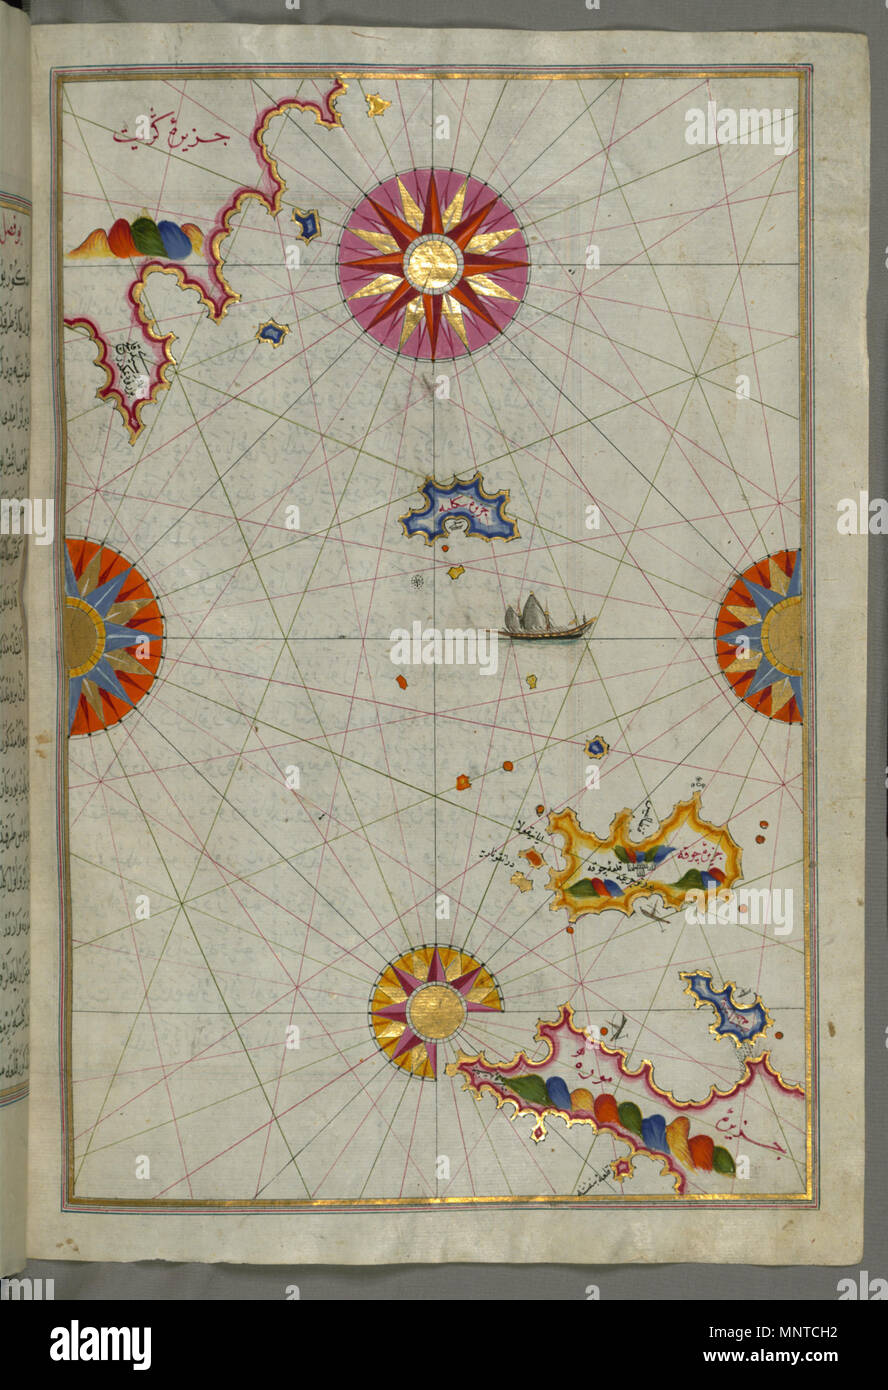 Piri Reis (Turkish, 1465-1555). 'Leaf from Book on Navigation,' 17th-18th century. ink, paint, and gold on paper. Walters Art Museum (W.658.124B): Acquired by Henry Walters. W.658.124b 1003 Piri Reis - Map of the Area Between the Peloponnese Peninsula and the Island of Crete - Walters W658124B - Full Page Stock Photo